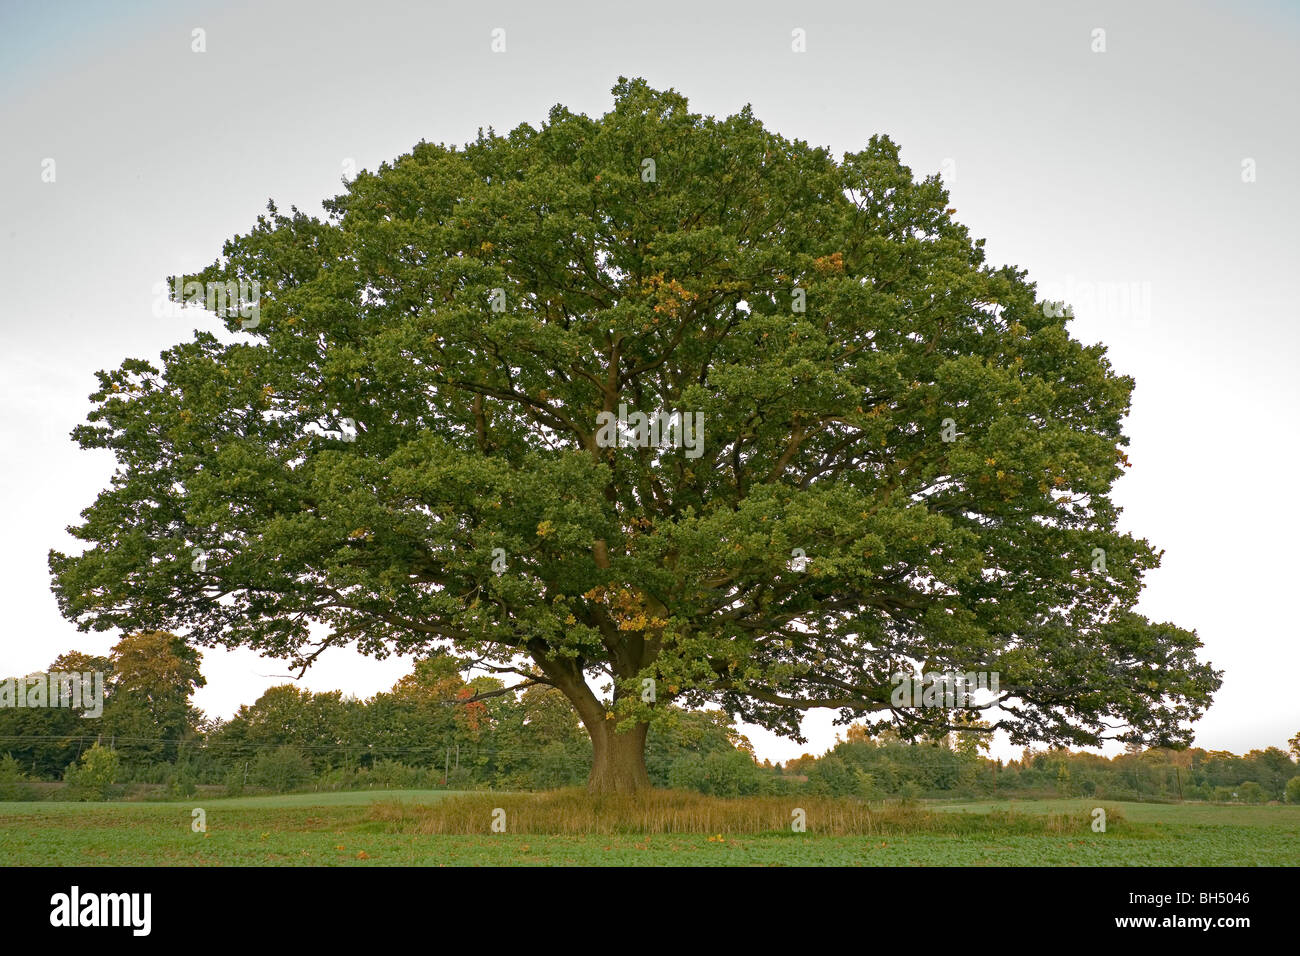 Big, old oak tree, common oak, English oak, Quercus robur, still with green leaves in the fall in a winter crops field. Stock Photo